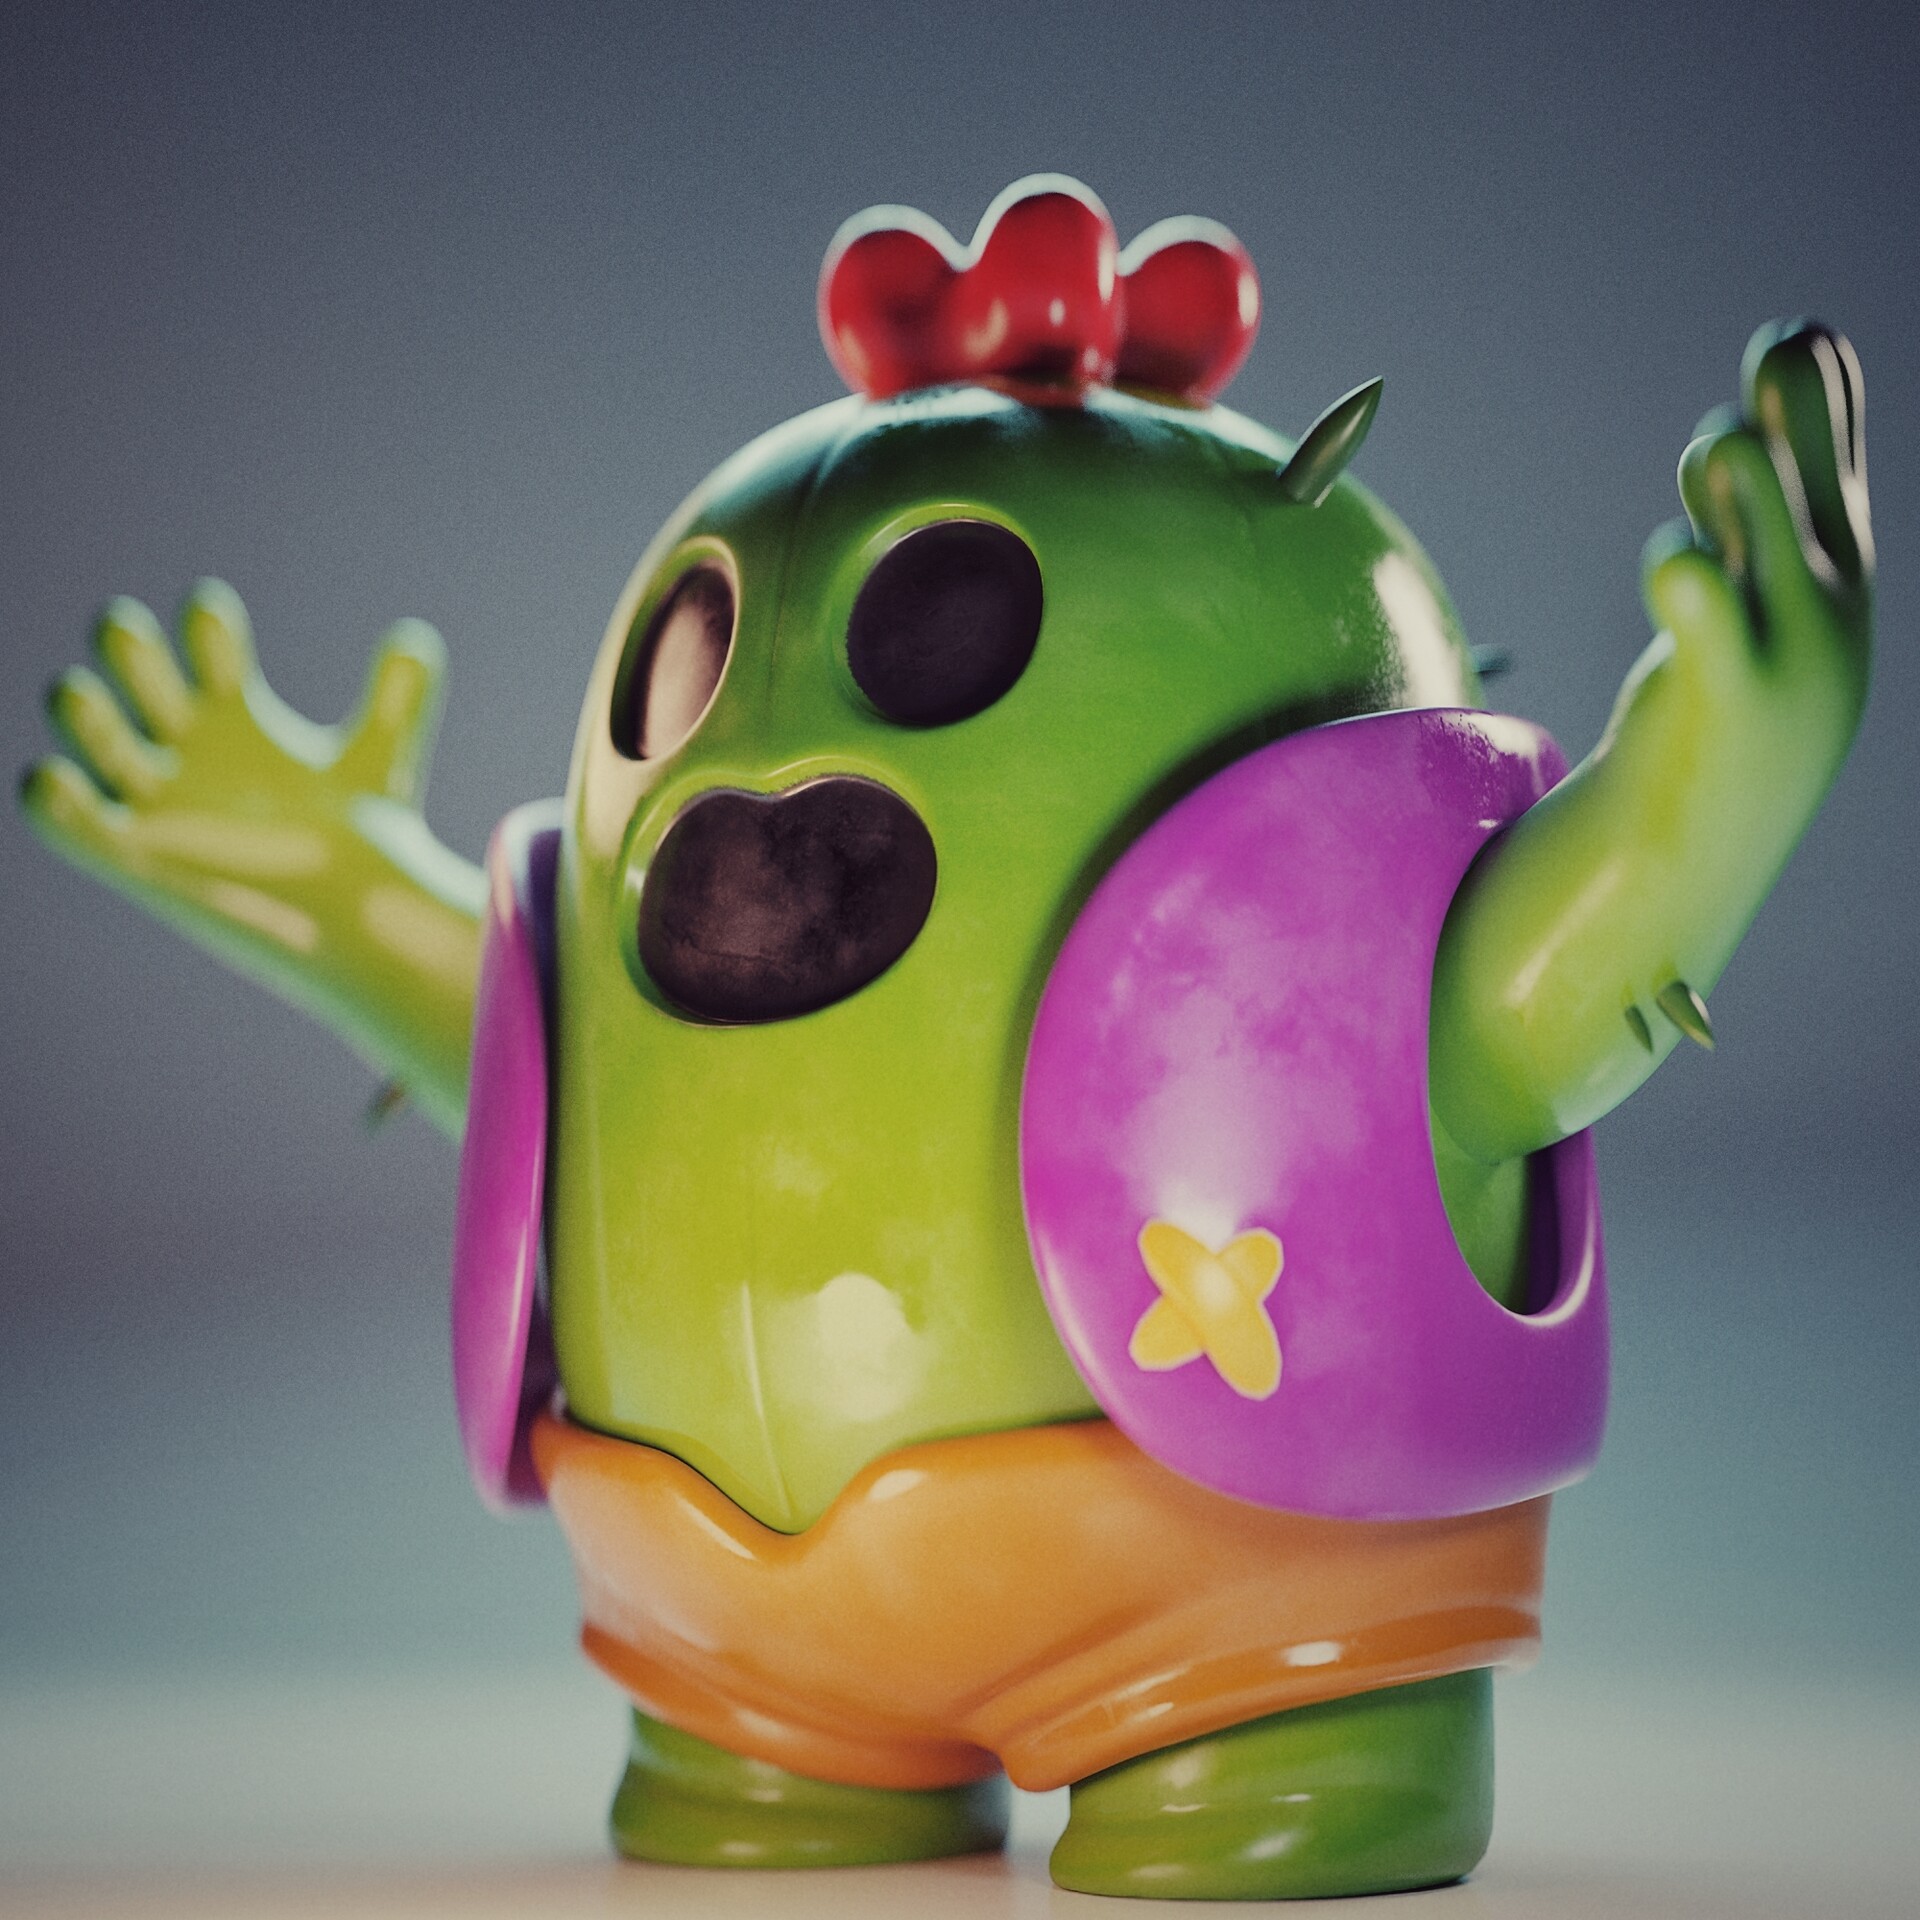 Official Brawl Stars Spike Cactus Action Figure